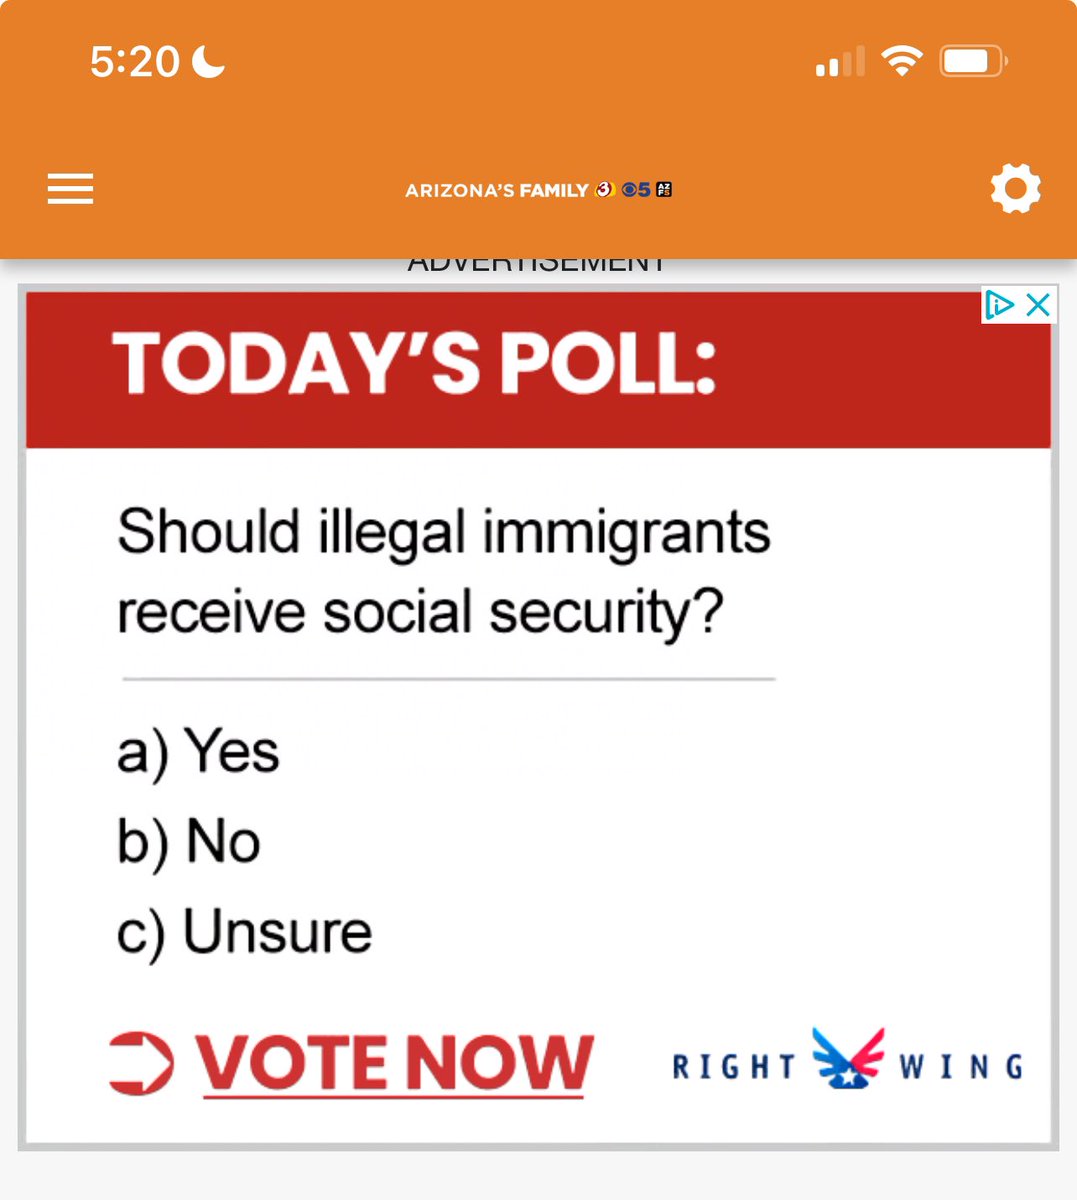 This is the bs 'poll' that our local Phoenix station puts on their app (not FOX). Infuriating.